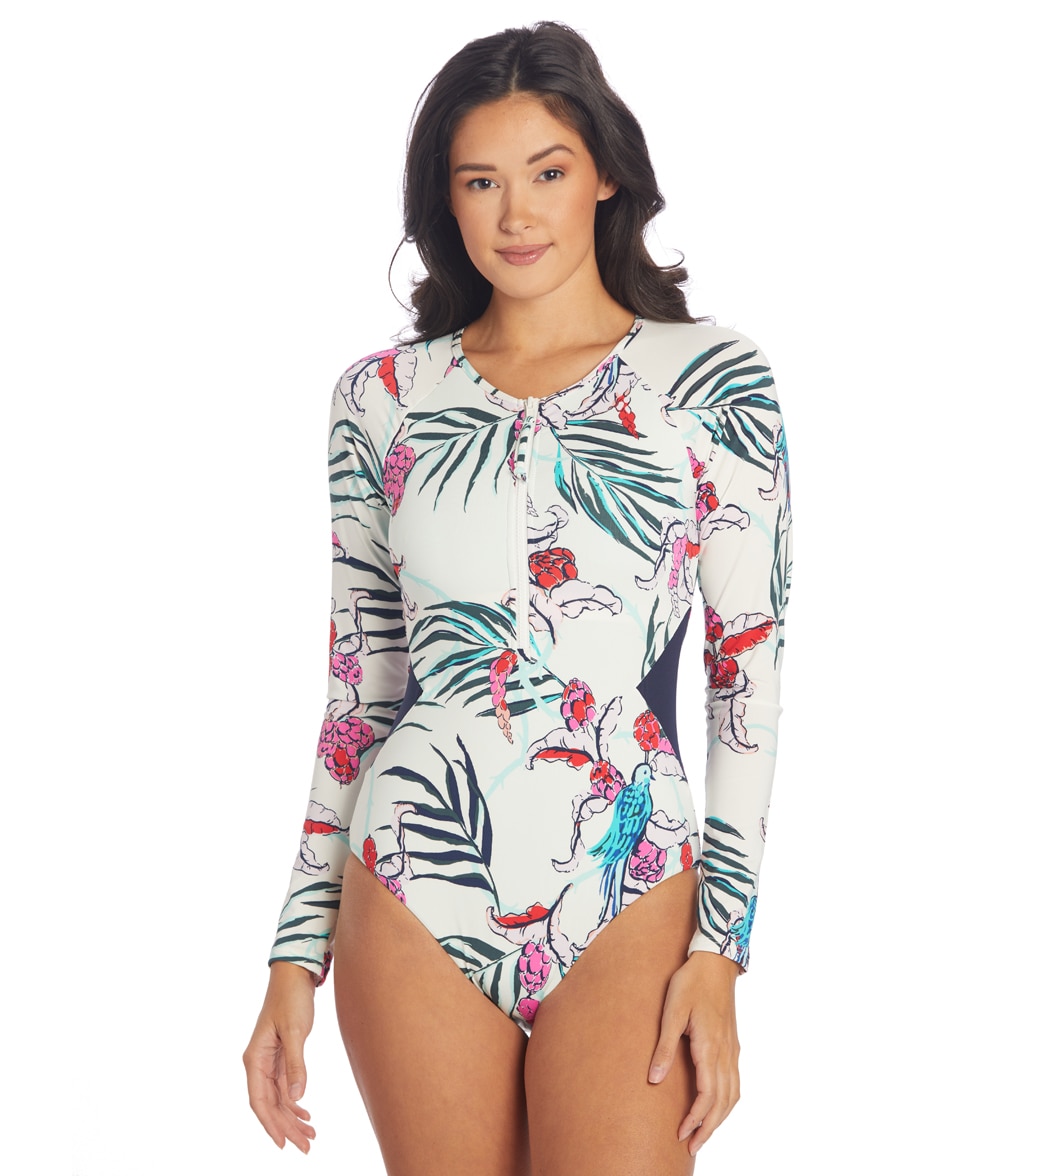 Carve Designs Women's Long Sleeve All Day One Piece Swimsuit - Botanical Large - Swimoutlet.com